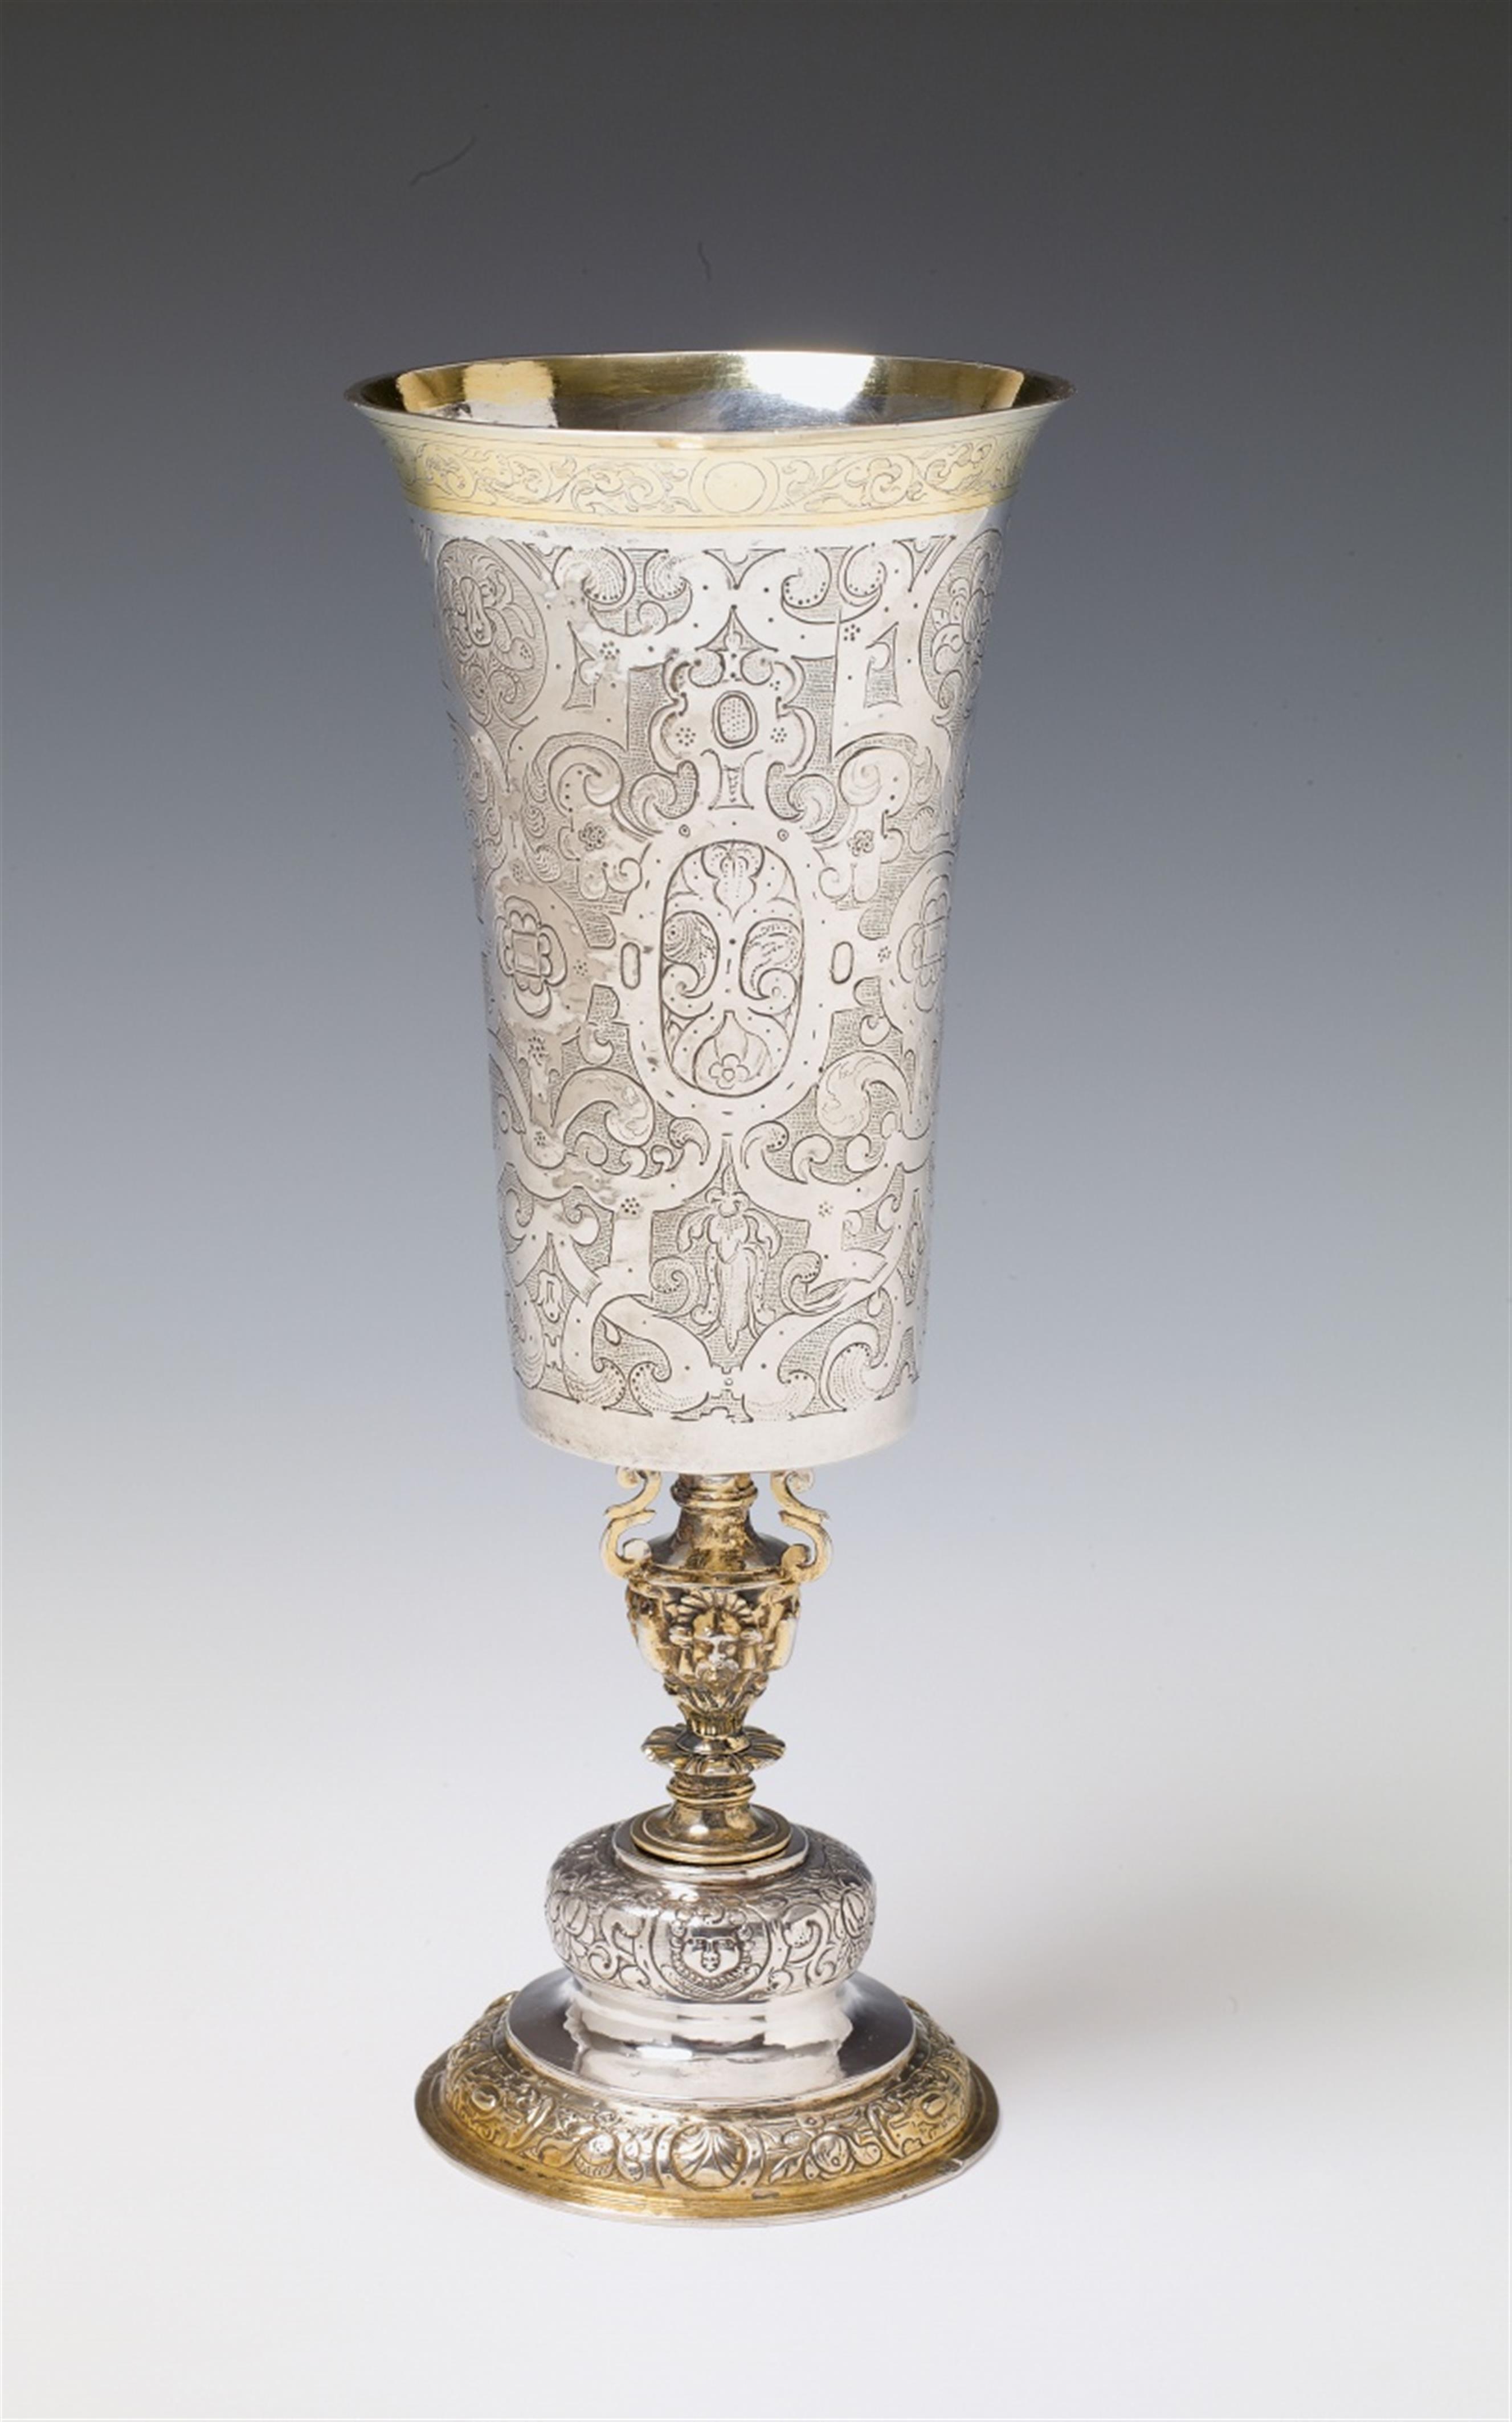 A Frankfurt renaissance silver partially gilt cup. With a round, waisted foot decorated with portrait reliefs in reserves between embossed strapwork and fruit. The cast pommel with four symmetrical mascarons and volutes. The conical cup with floral and sc - image-1